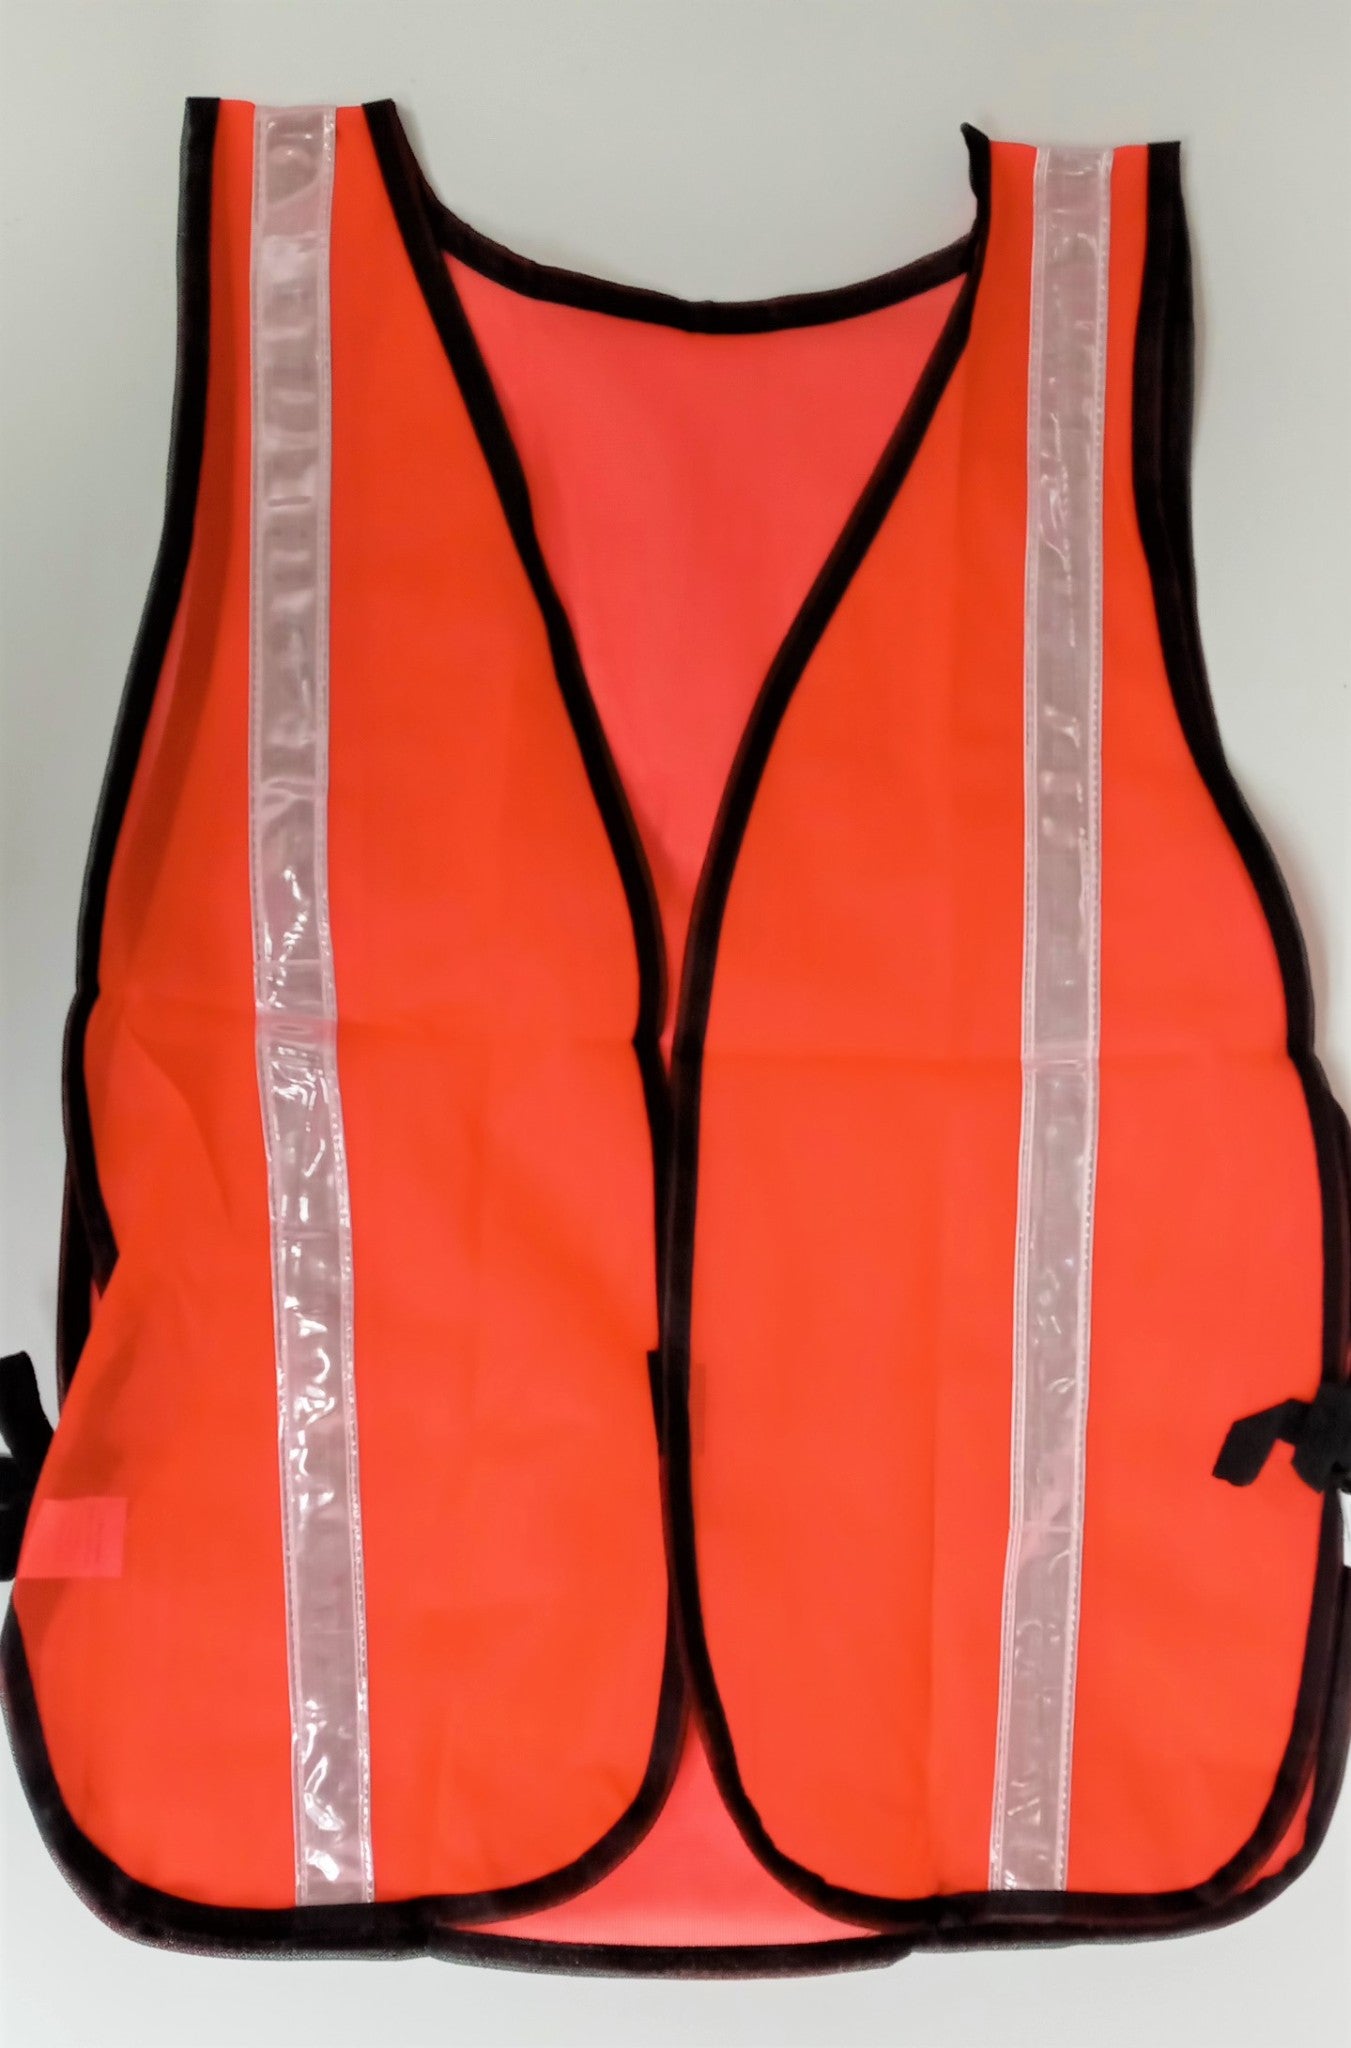 Ansell 950382 One Size Fits All Safety Vests, Case of 144pcs